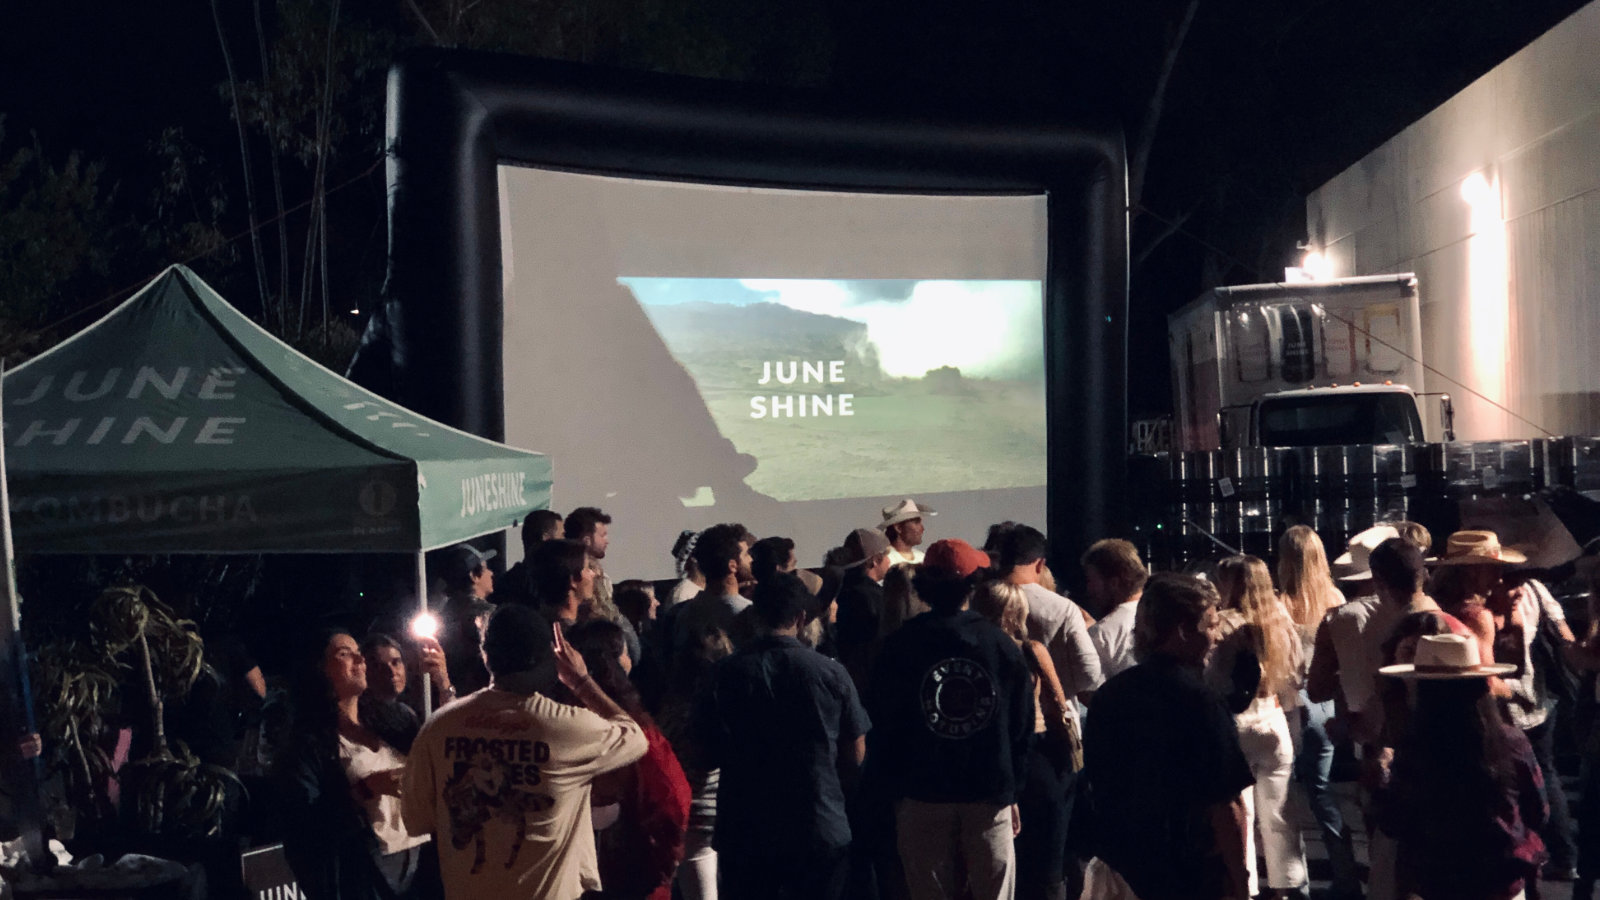 Juneshine hosting a corporate event party